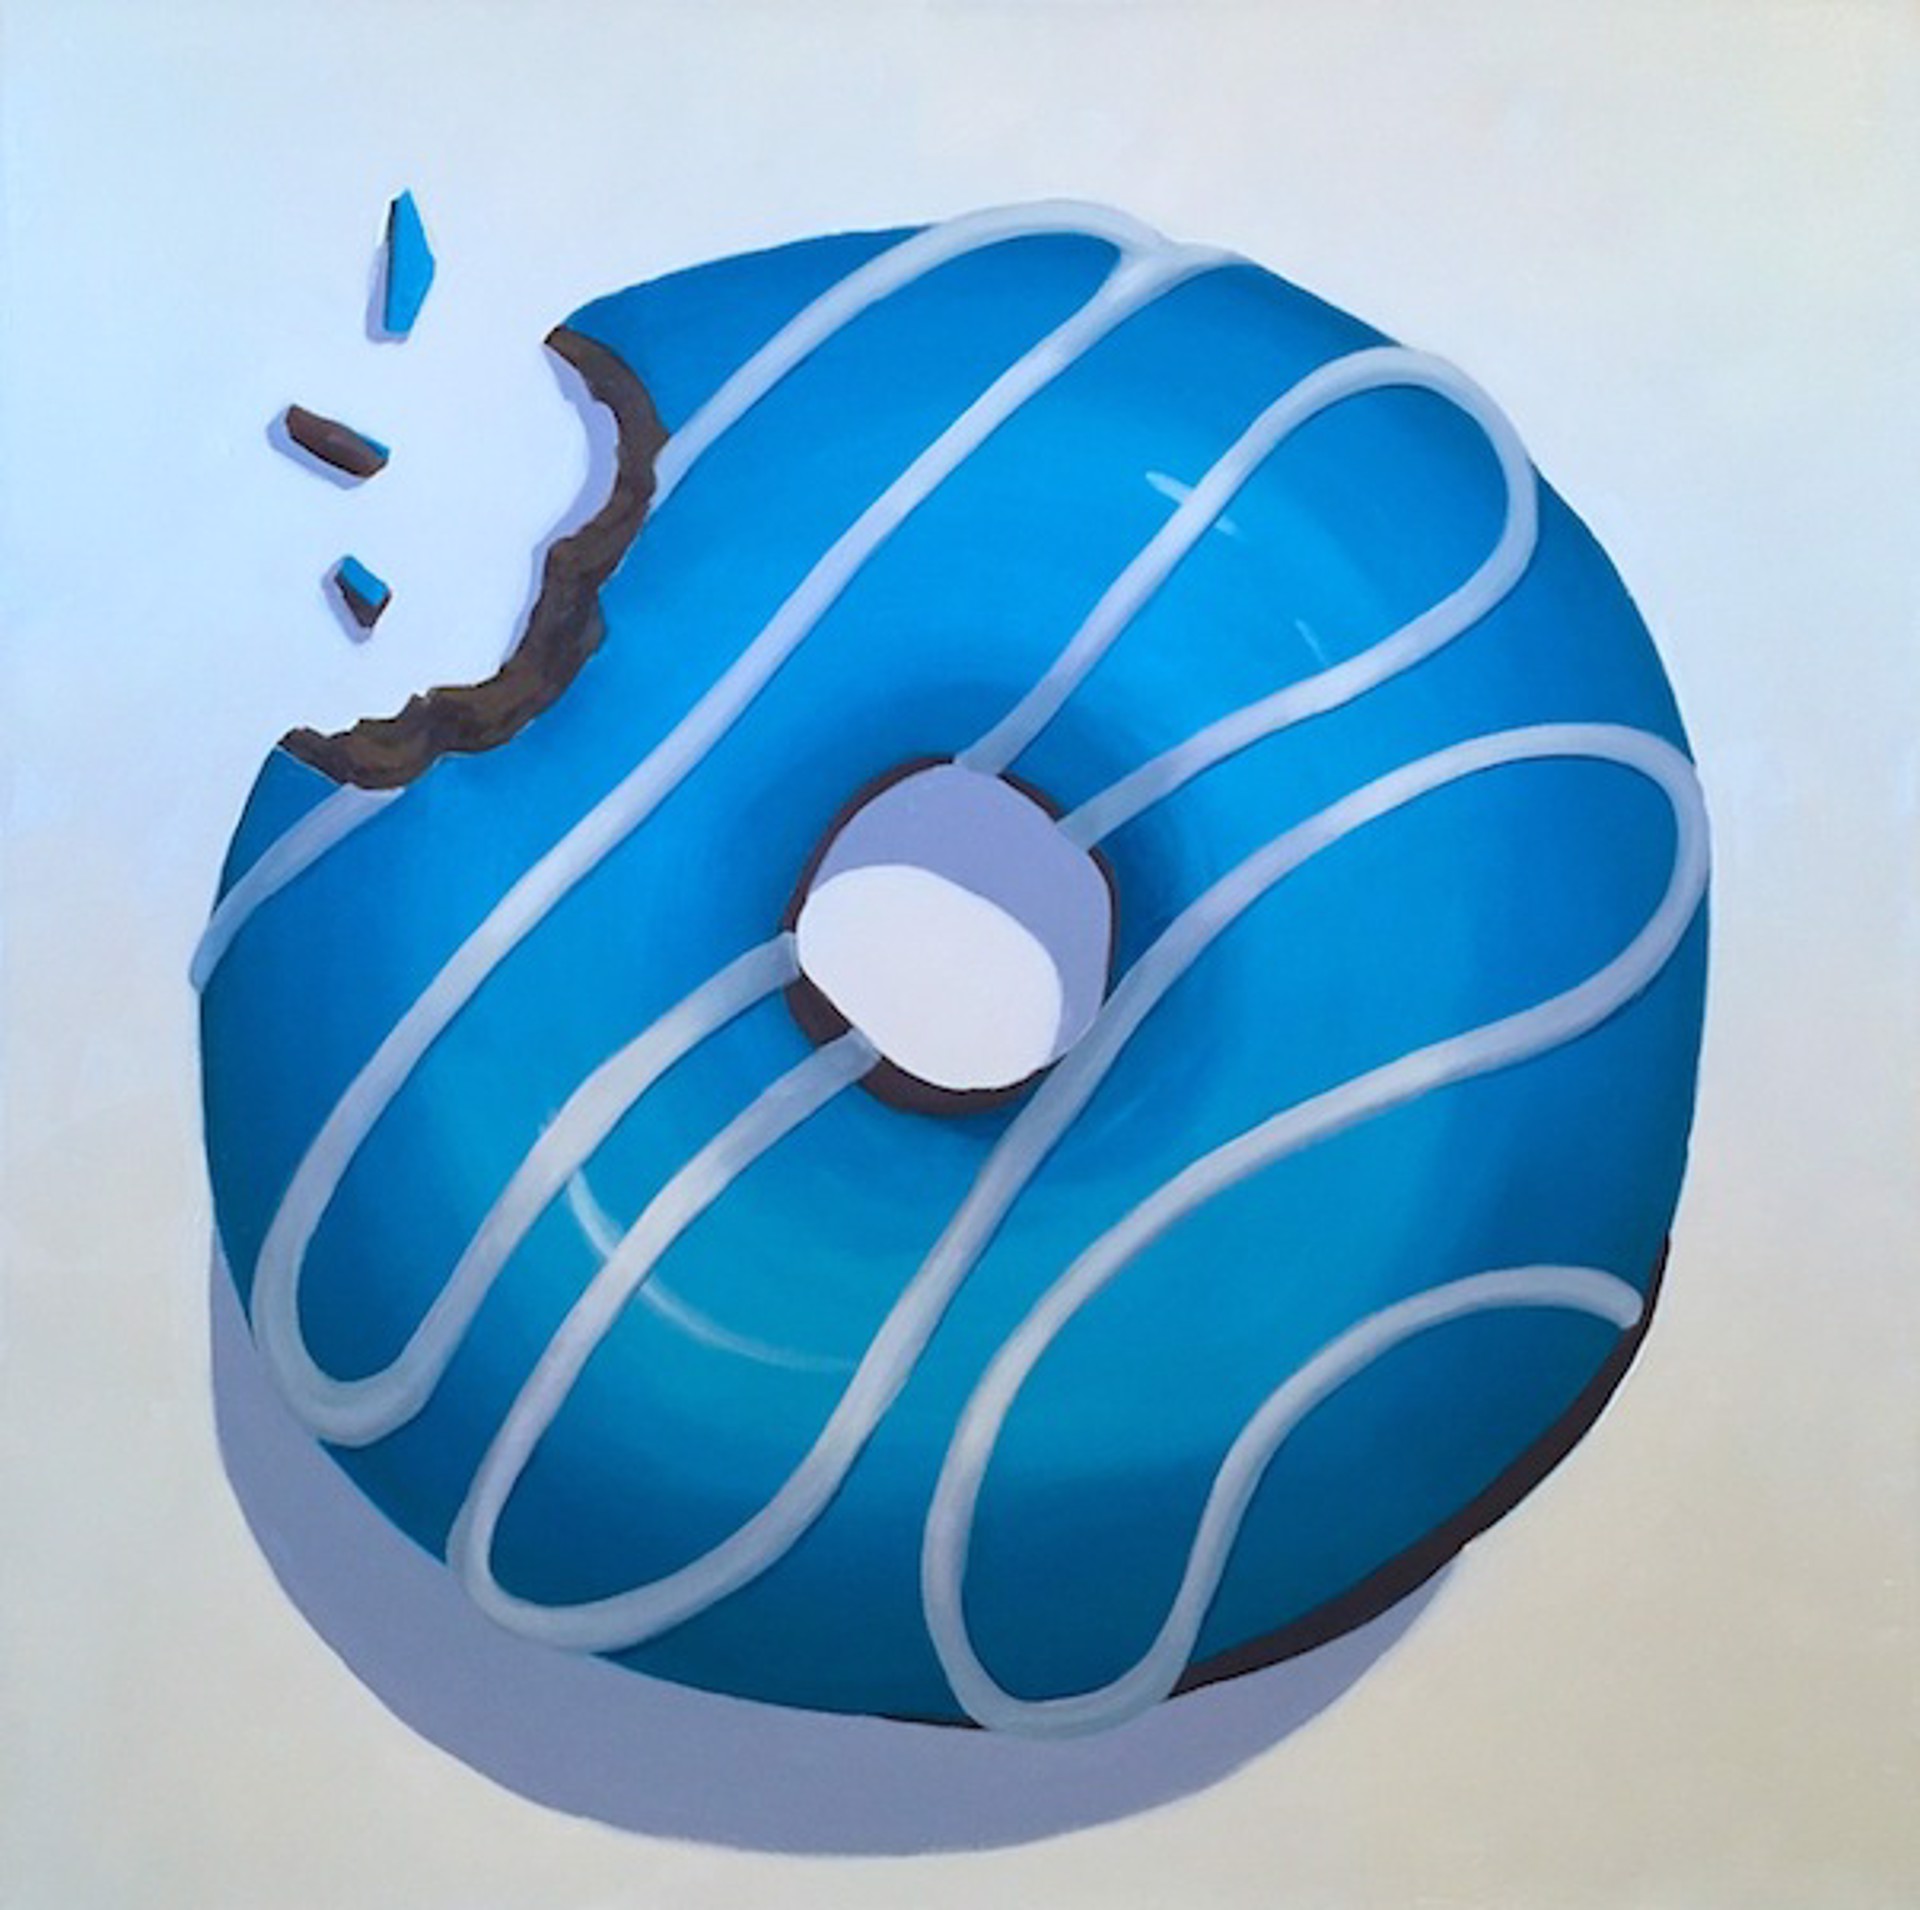 Blue Donut with White Swirl by Terry Romero Paul